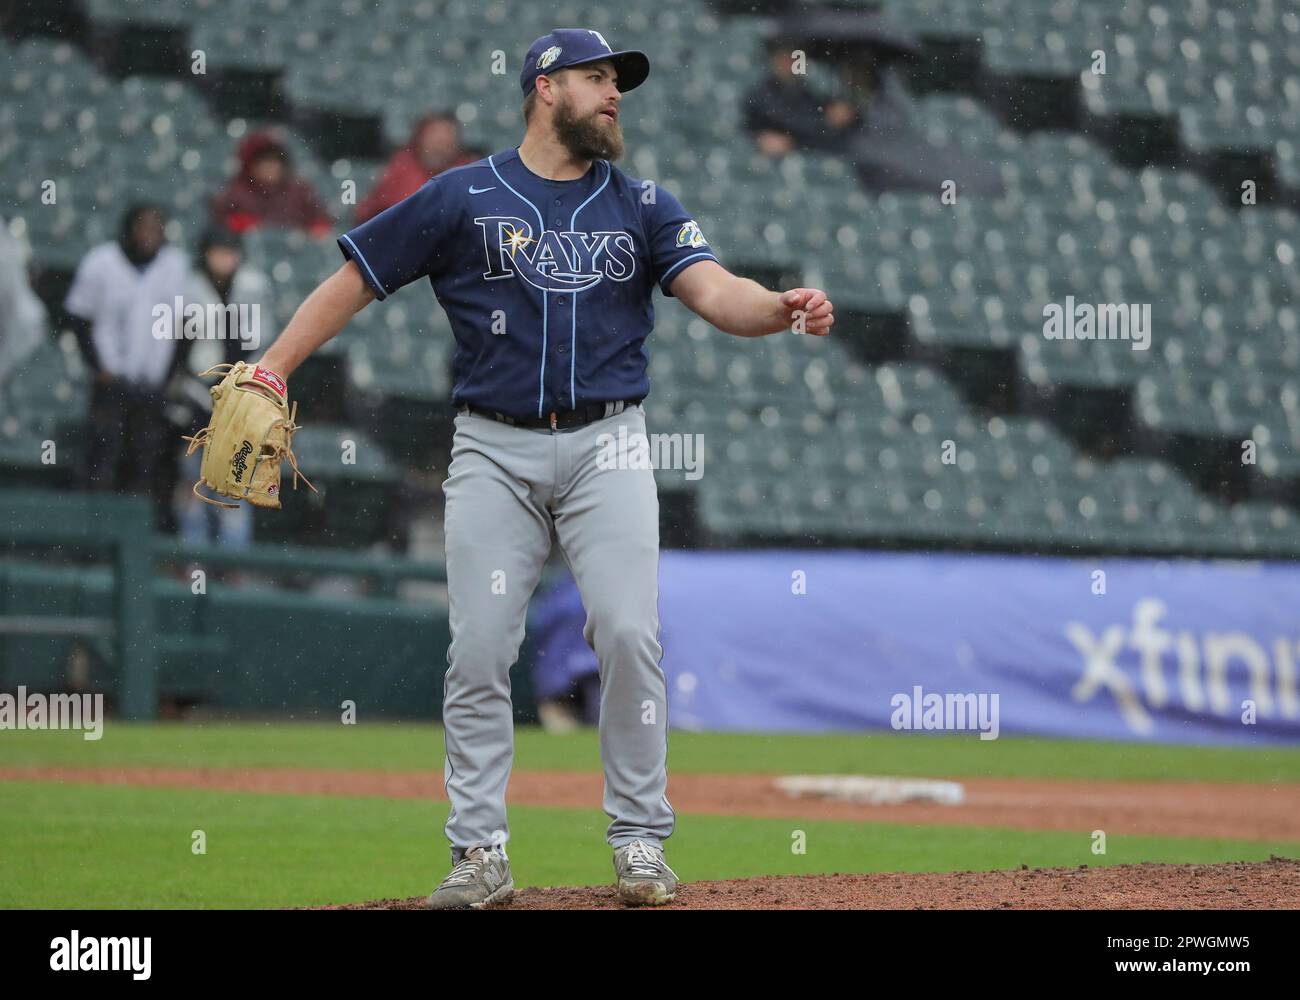 CHICAGO, IL - APRIL 30: Tampa Bay Rays relief pitcher Jalen Beeks